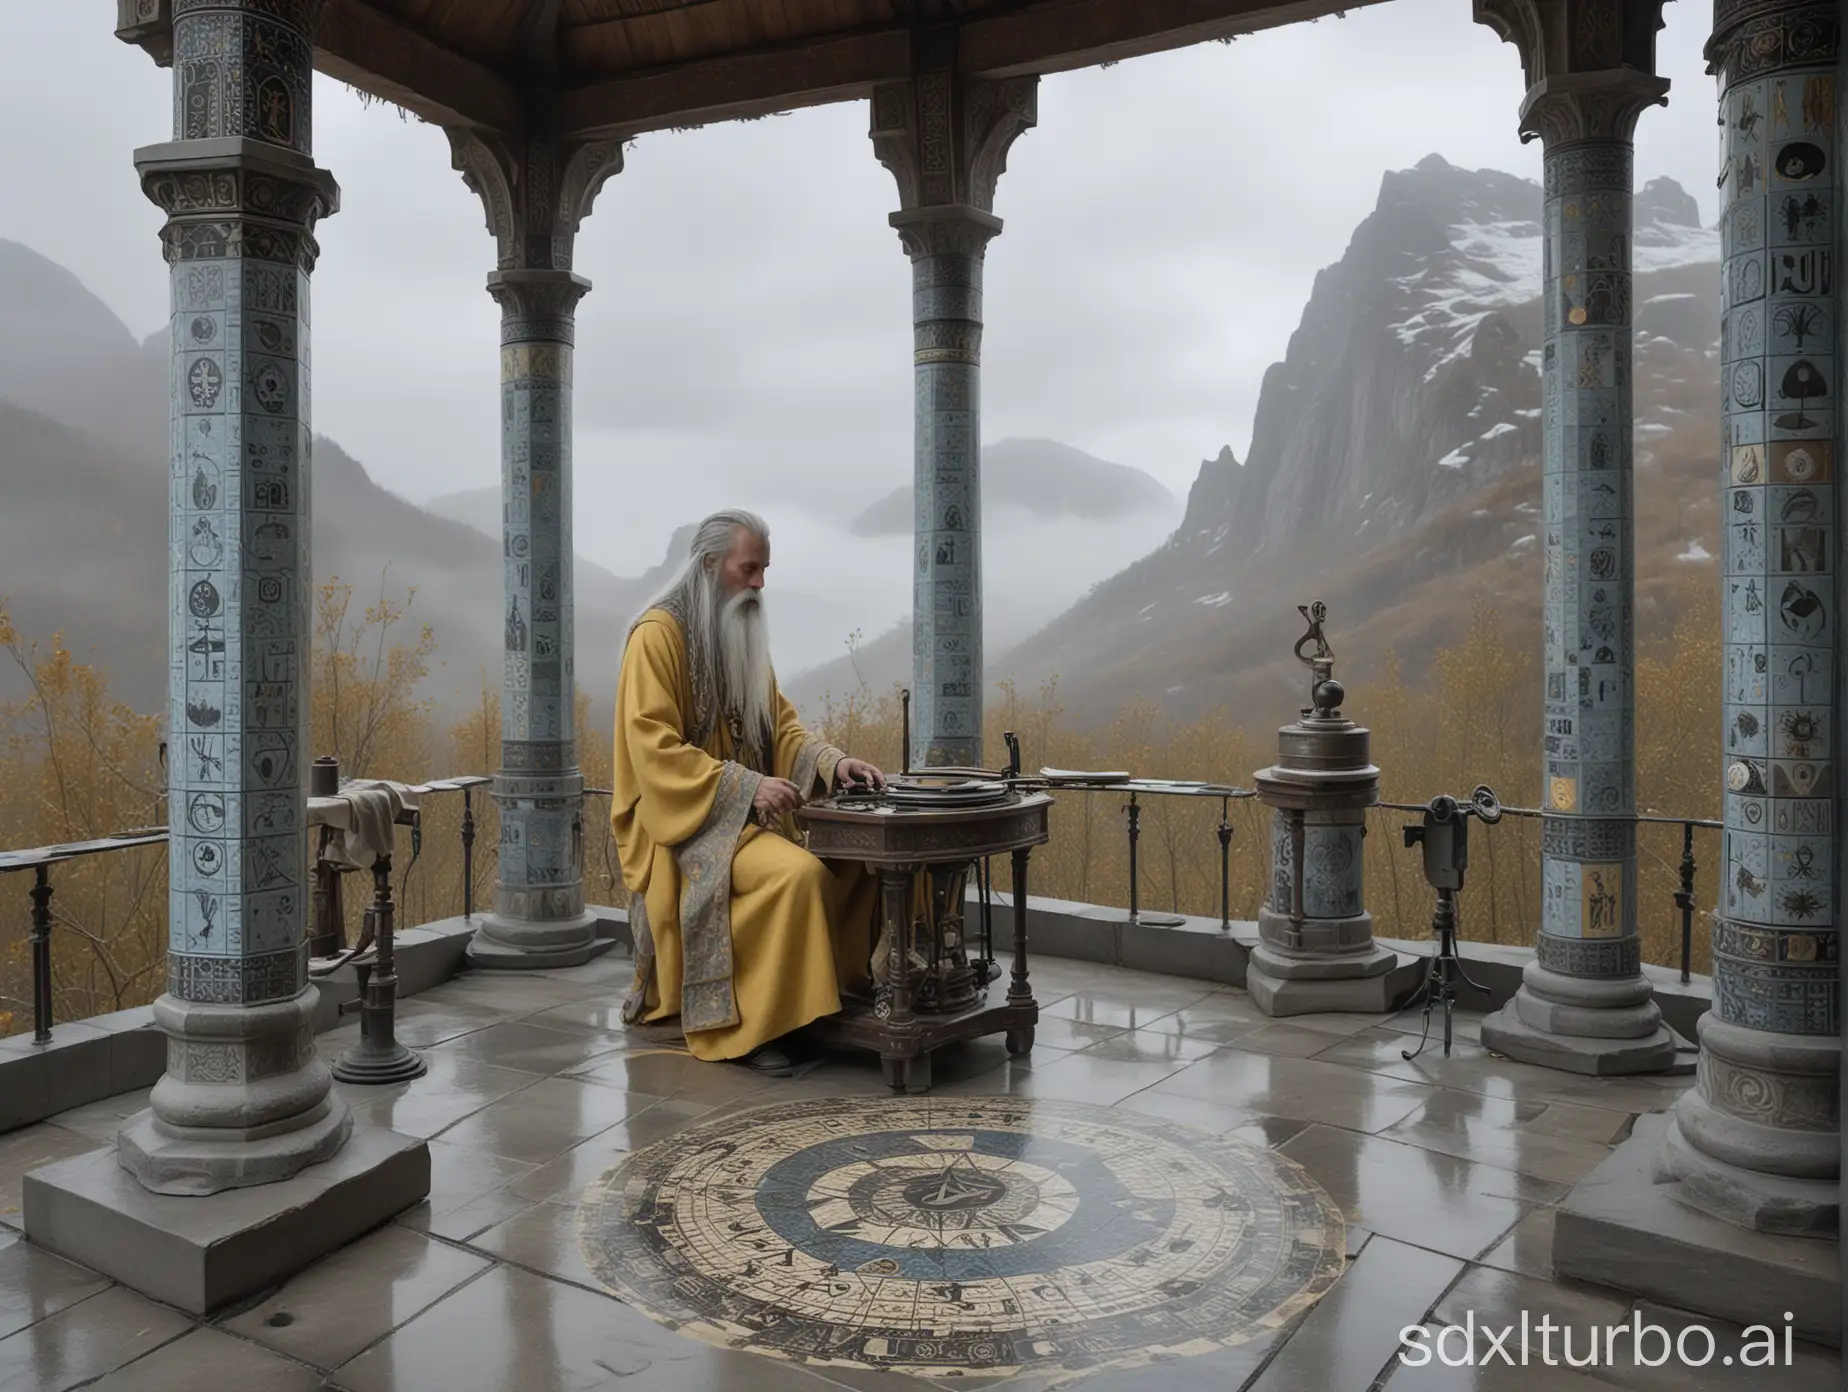 A vast outdoor gothic laboratory, light blue and gray mosaic columns, floor; an antique phonograph; measure instruments; a male Nordic shaman with long grey hair and a light yellow tunic decorated with mystical symbols, cloudy mountain in the back, chiaroscuro, foggy Nordic atmosphere, high precision, highly detailed, photographic